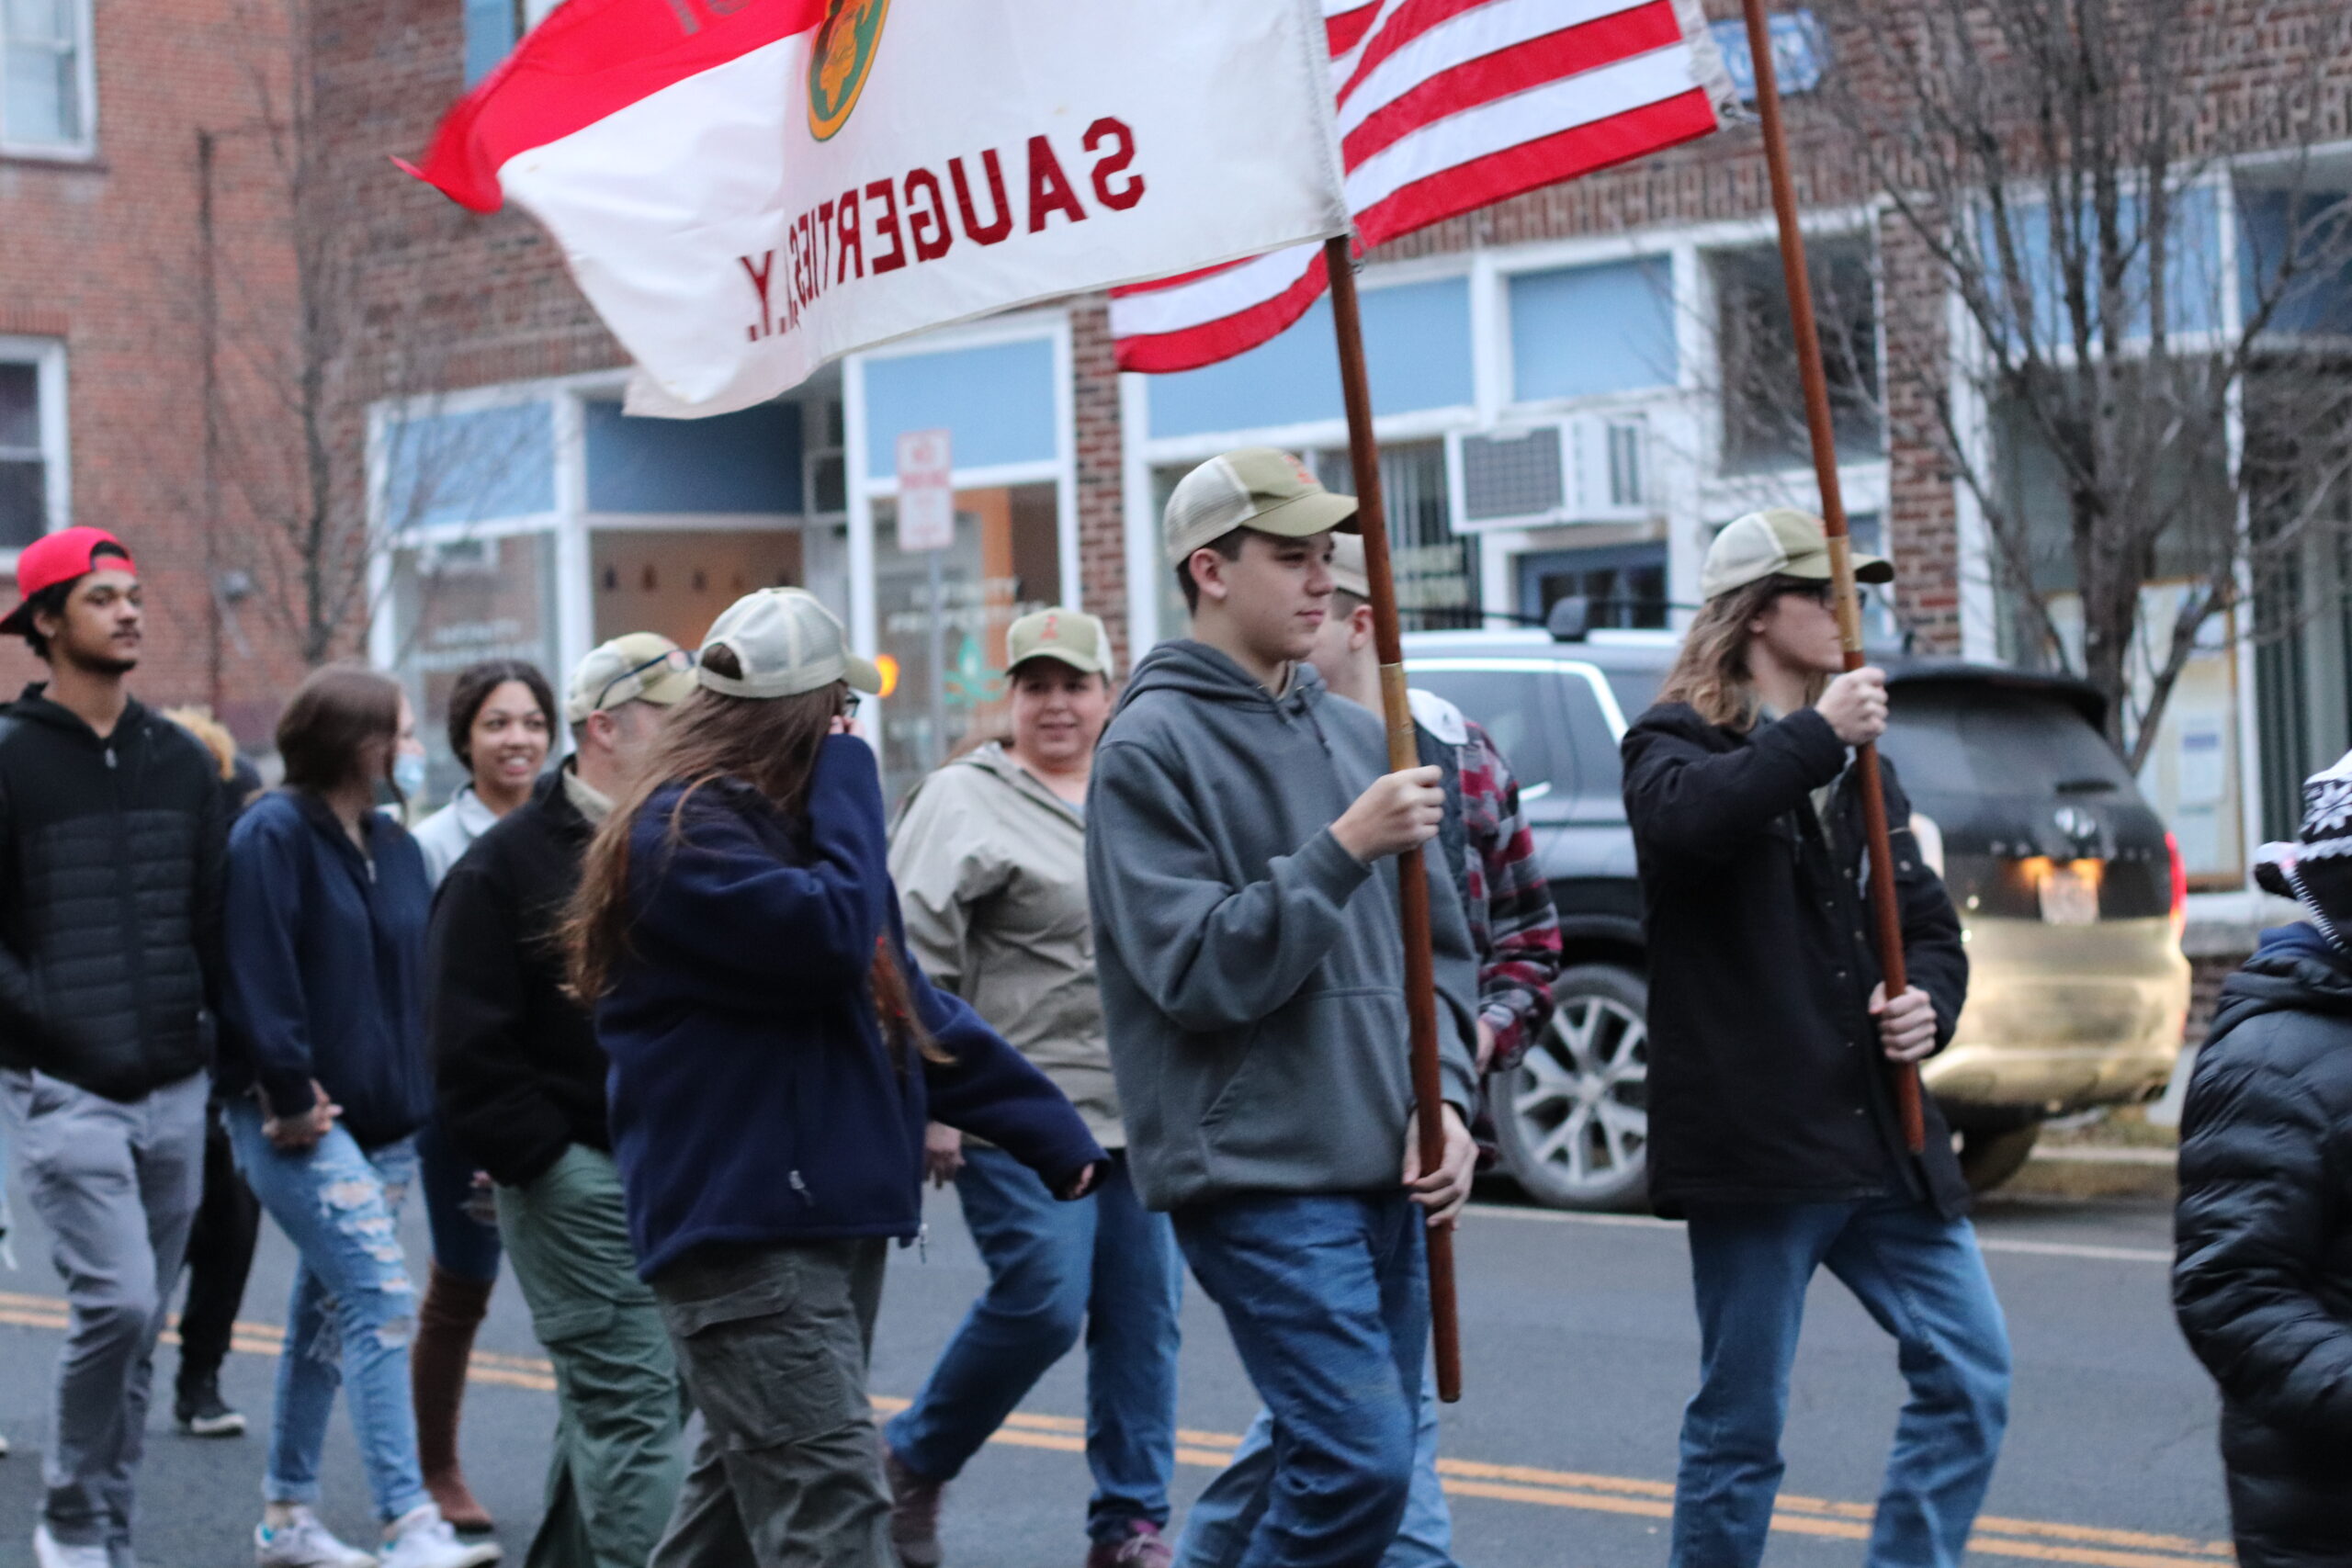 students marching with boy scouts flags